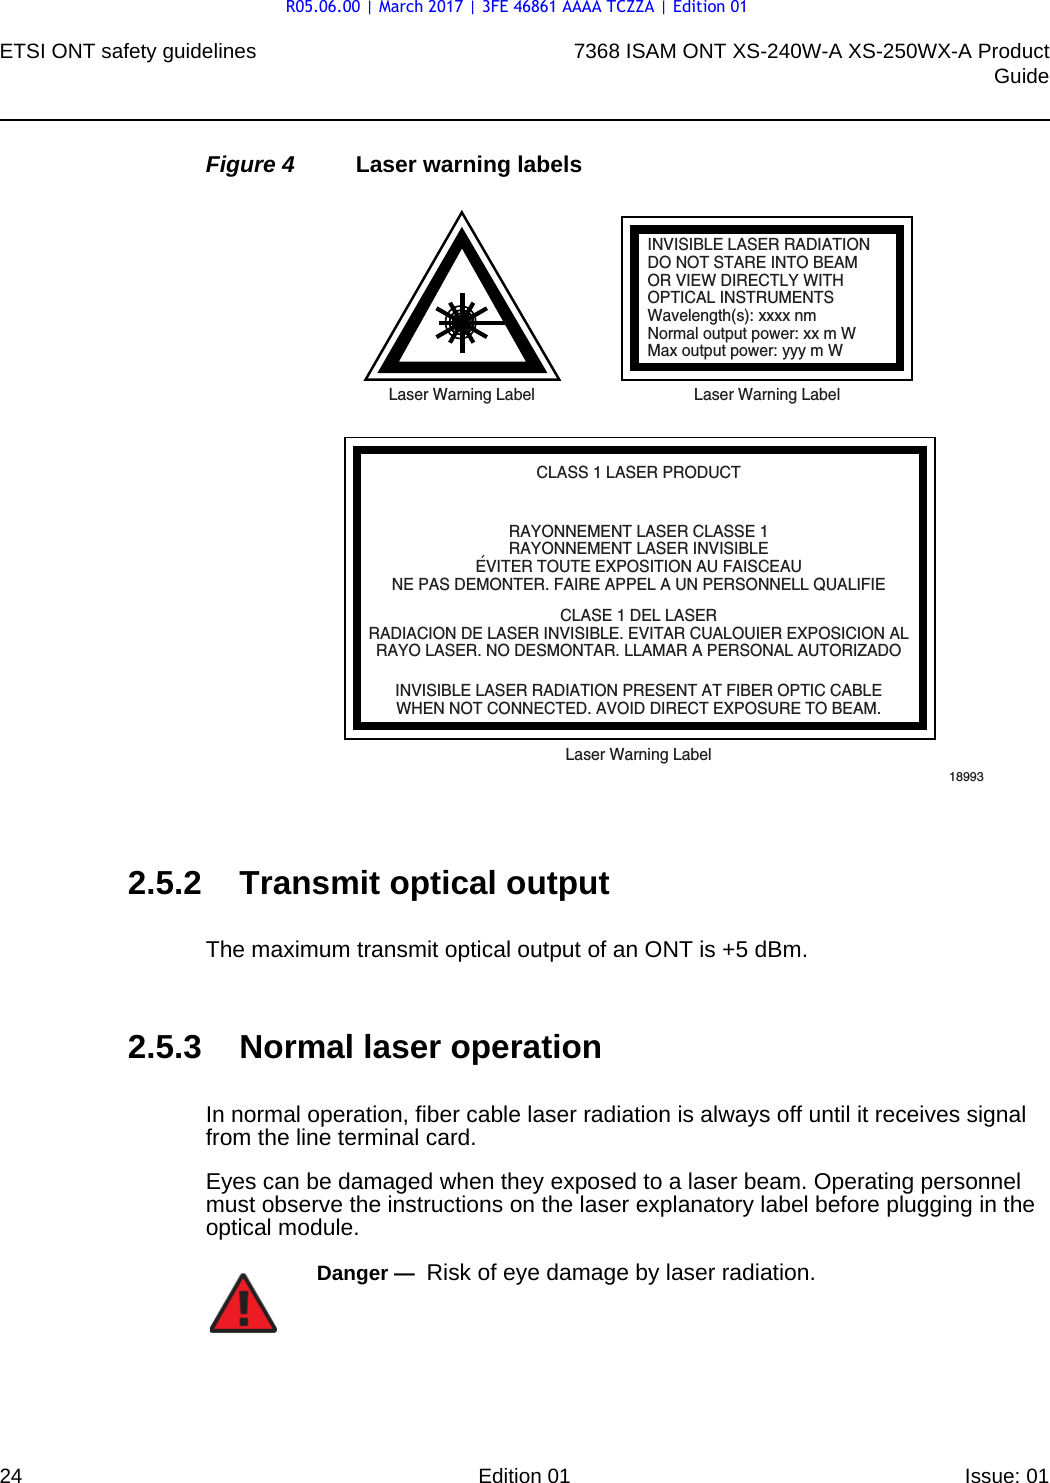 ETSI ONT safety guidelines247368 ISAM ONT XS-240W-A XS-250WX-A ProductGuideEdition 01 Issue: 01 Figure 4 Laser warning labels2.5.2 Transmit optical outputThe maximum transmit optical output of an ONT is +5 dBm.2.5.3 Normal laser operationIn normal operation, fiber cable laser radiation is always off until it receives signal from the line terminal card.Eyes can be damaged when they exposed to a laser beam. Operating personnel must observe the instructions on the laser explanatory label before plugging in the optical module.INVISIBLE LASER RADIATIONDO NOT STARE INTO BEAMOR VIEW DIRECTLY WITHOPTICAL INSTRUMENTSWavelength(s): xxxx nmNormal output power: xx m WMax output power: yyy m WLaser Warning Label Laser Warning LabelCLASS 1 LASER PRODUCTINVISIBLE LASER RADIATION PRESENT AT FIBER OPTIC CABLEWHEN NOT CONNECTED. AVOID DIRECT EXPOSURE TO BEAM.RAYONNEMENT LASER CLASSE 1RAYONNEMENT LASER INVISIBLEEVITER TOUTE EXPOSITION AU FAISCEAUNE PAS DEMONTER. FAIRE APPEL A UN PERSONNELL QUALIFIECLASE 1 DEL LASERRADIACION DE LASER INVISIBLE. EVITAR CUALOUIER EXPOSICION ALRAYO LASER. NO DESMONTAR. LLAMAR A PERSONAL AUTORIZADOLaser Warning Label18993&apos;Danger —  Risk of eye damage by laser radiation.R05.06.00 | March 2017 | 3FE 46861 AAAA TCZZA | Edition 01